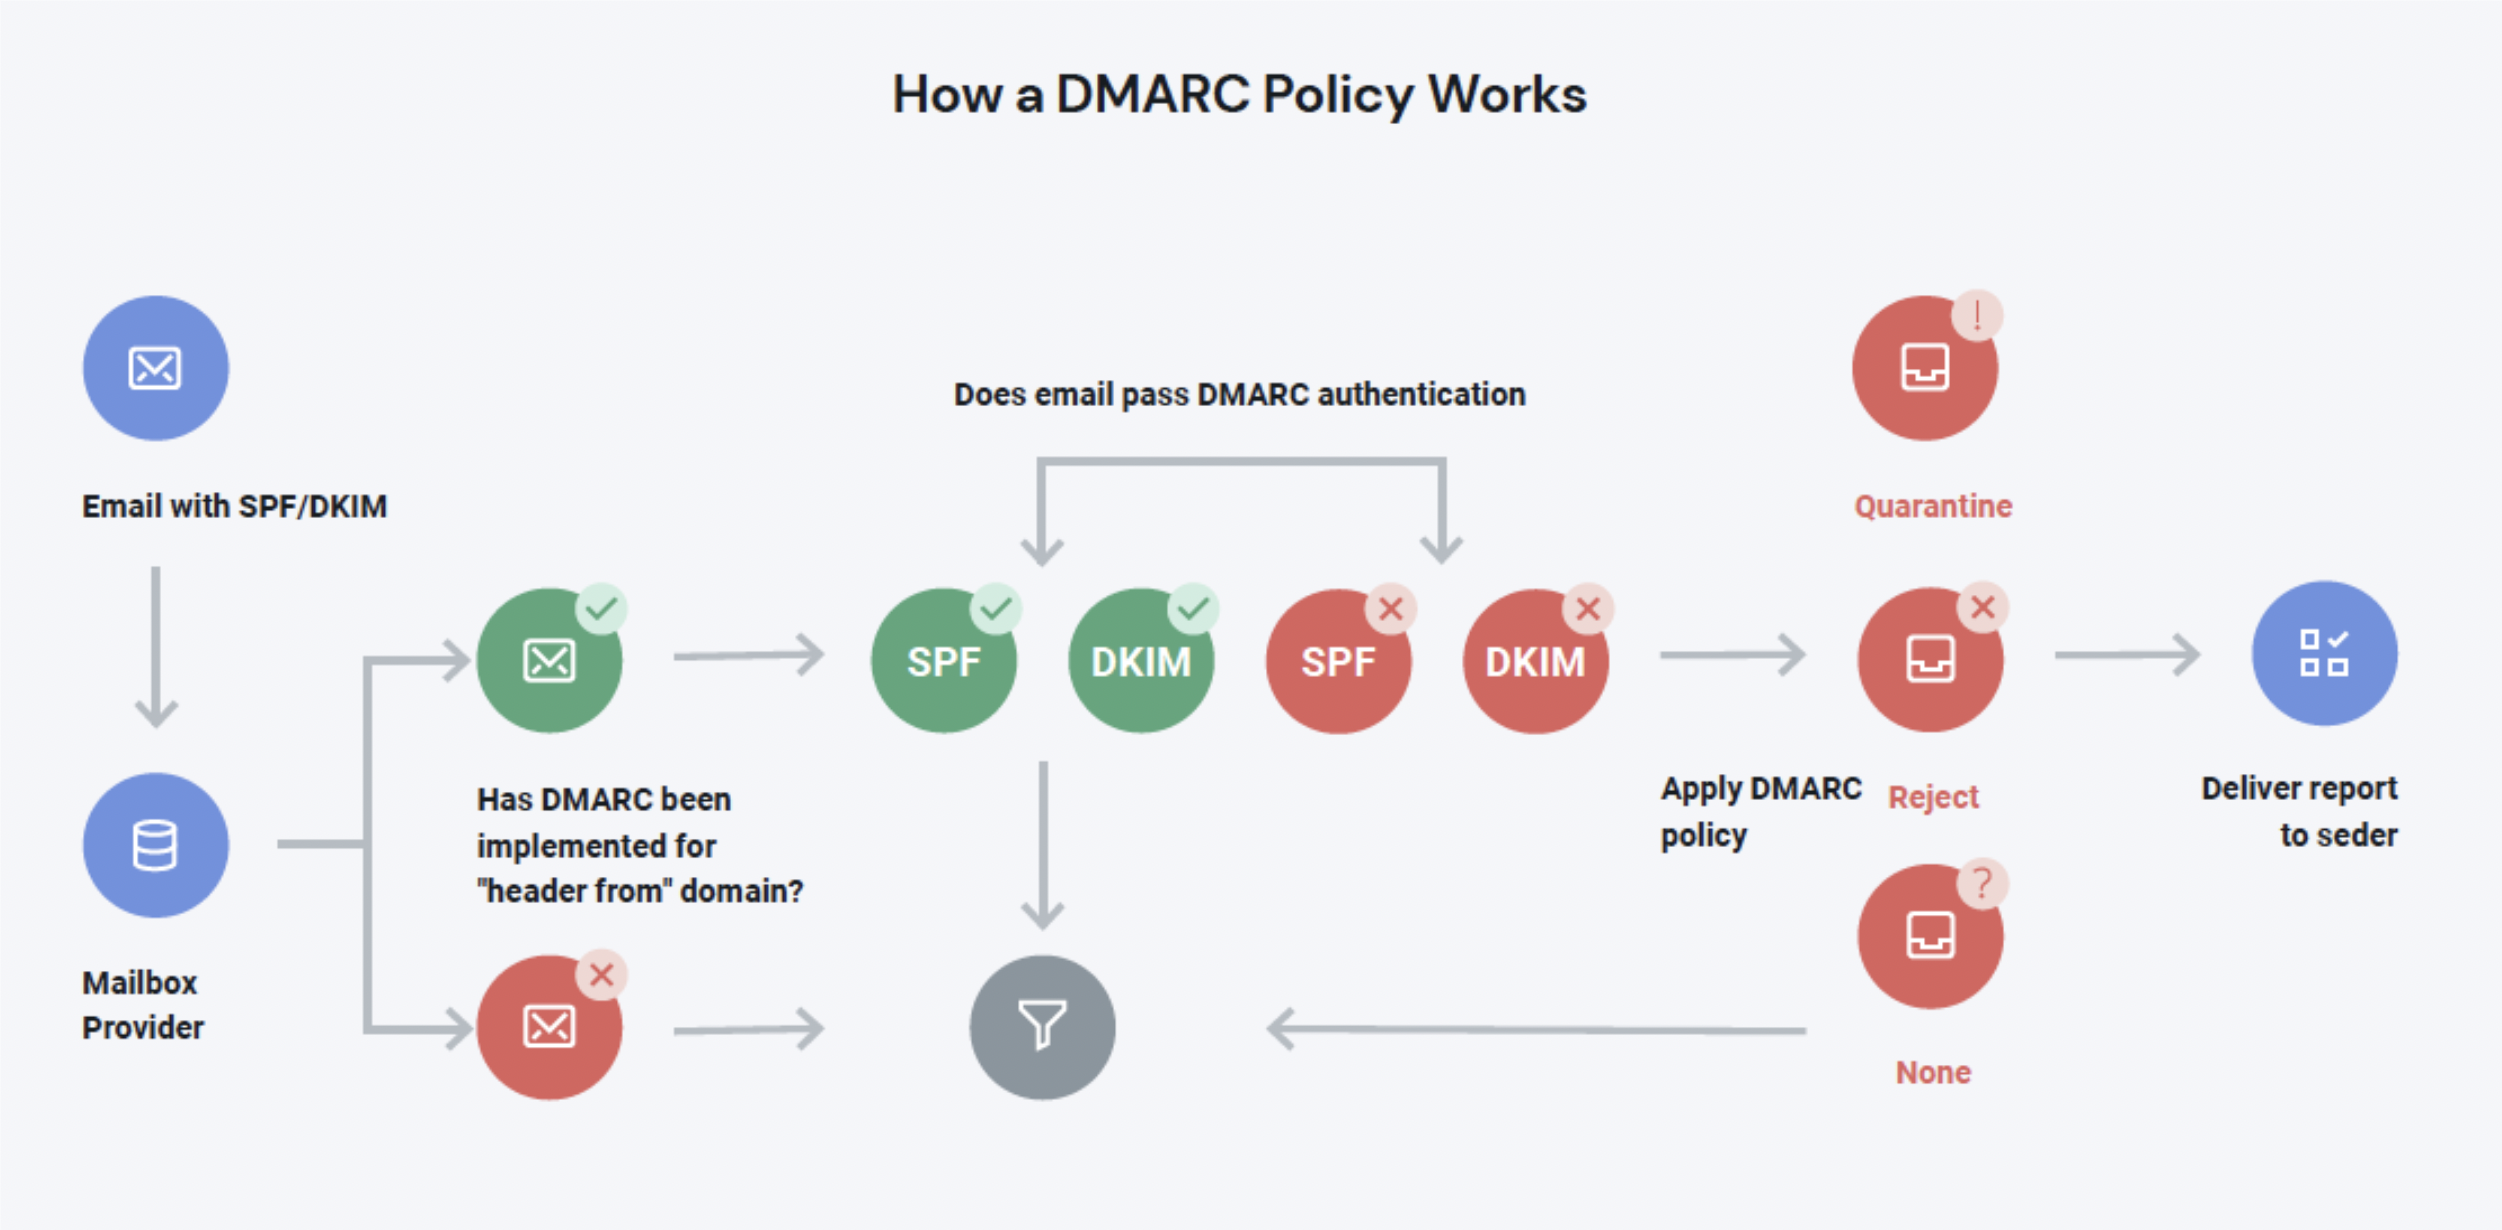 Image shows how a DMARC policy works from an email with SPF/DKIM through the mailbox provider, to verifying DMARC implementation, passing DMARC authentication, and applying the DMARC policy to deliver to sender.